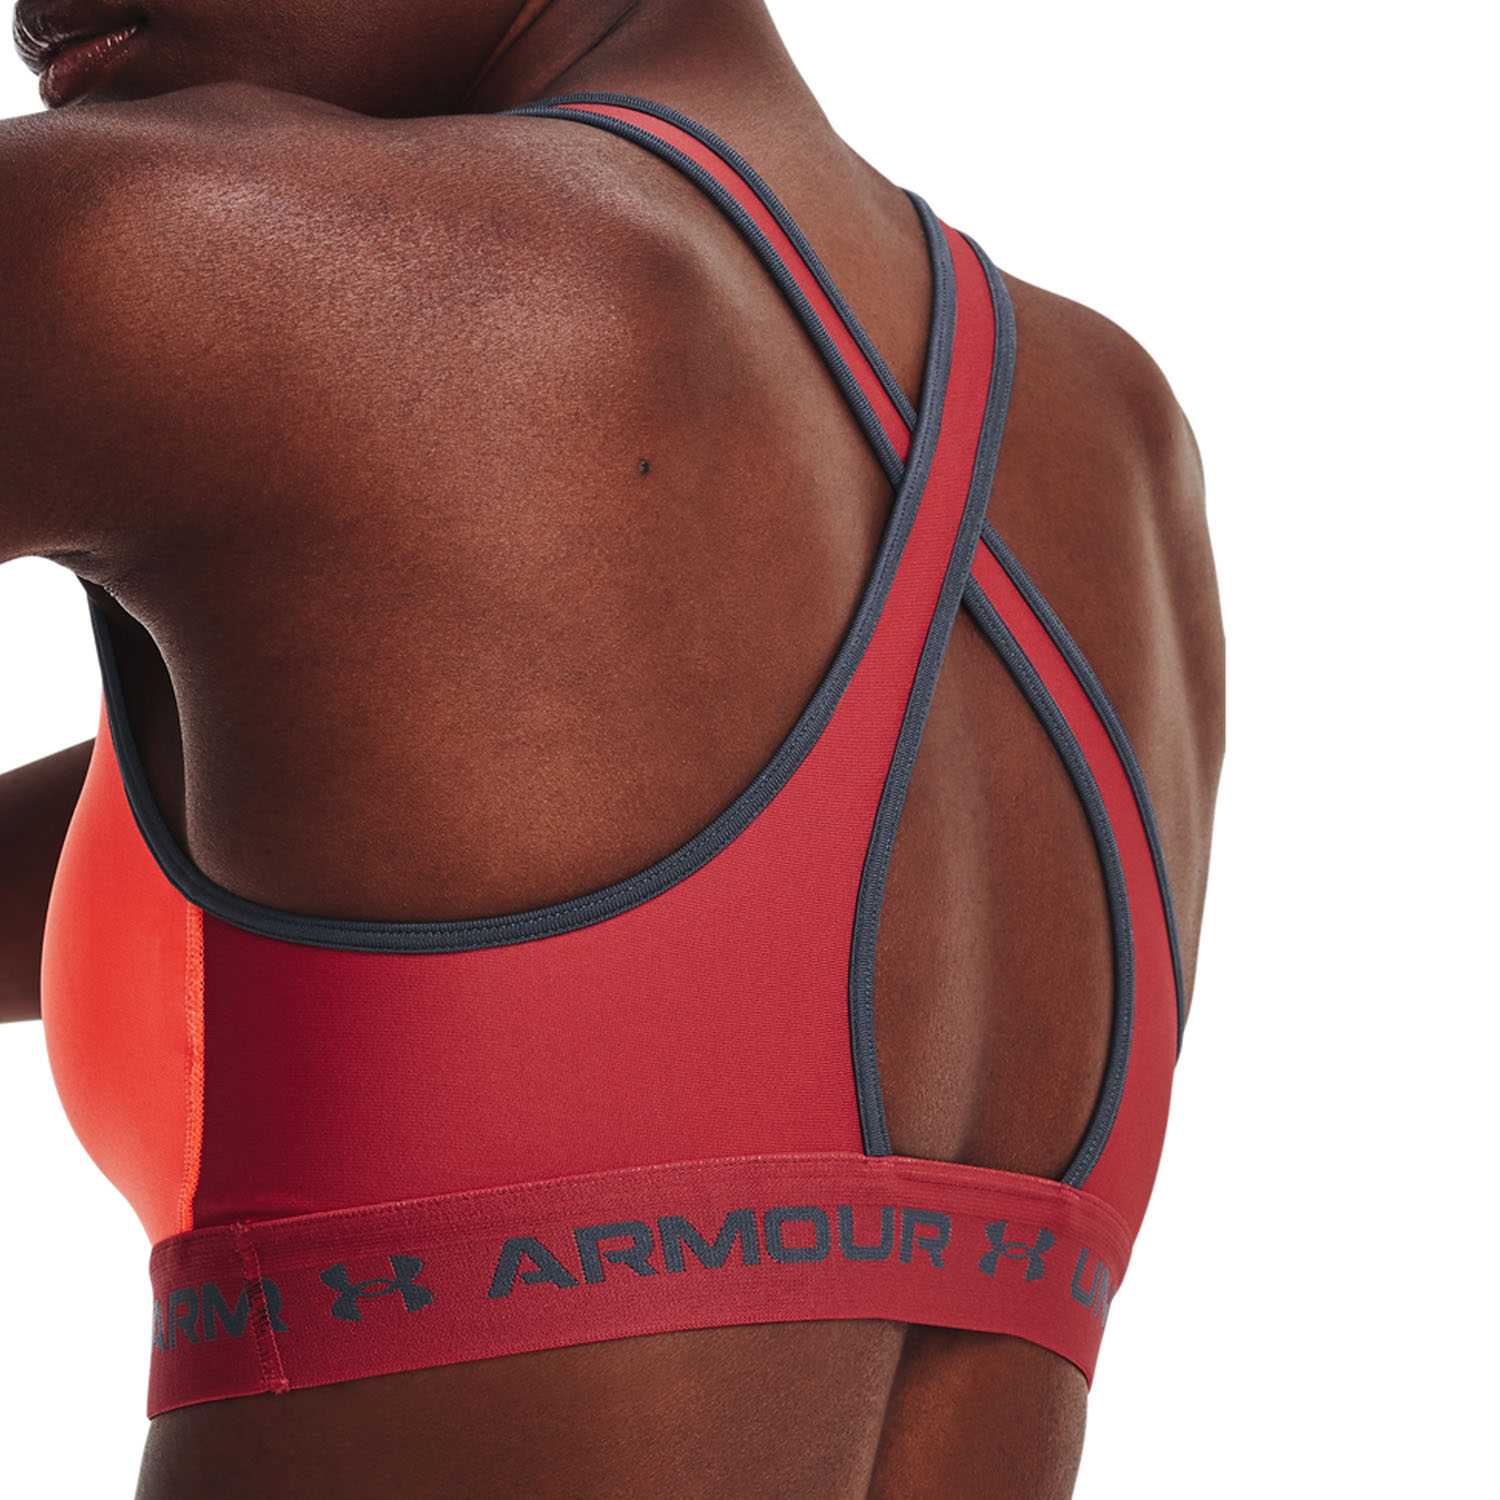 Under Armour Crossback Mid Sports Bra - After Burn